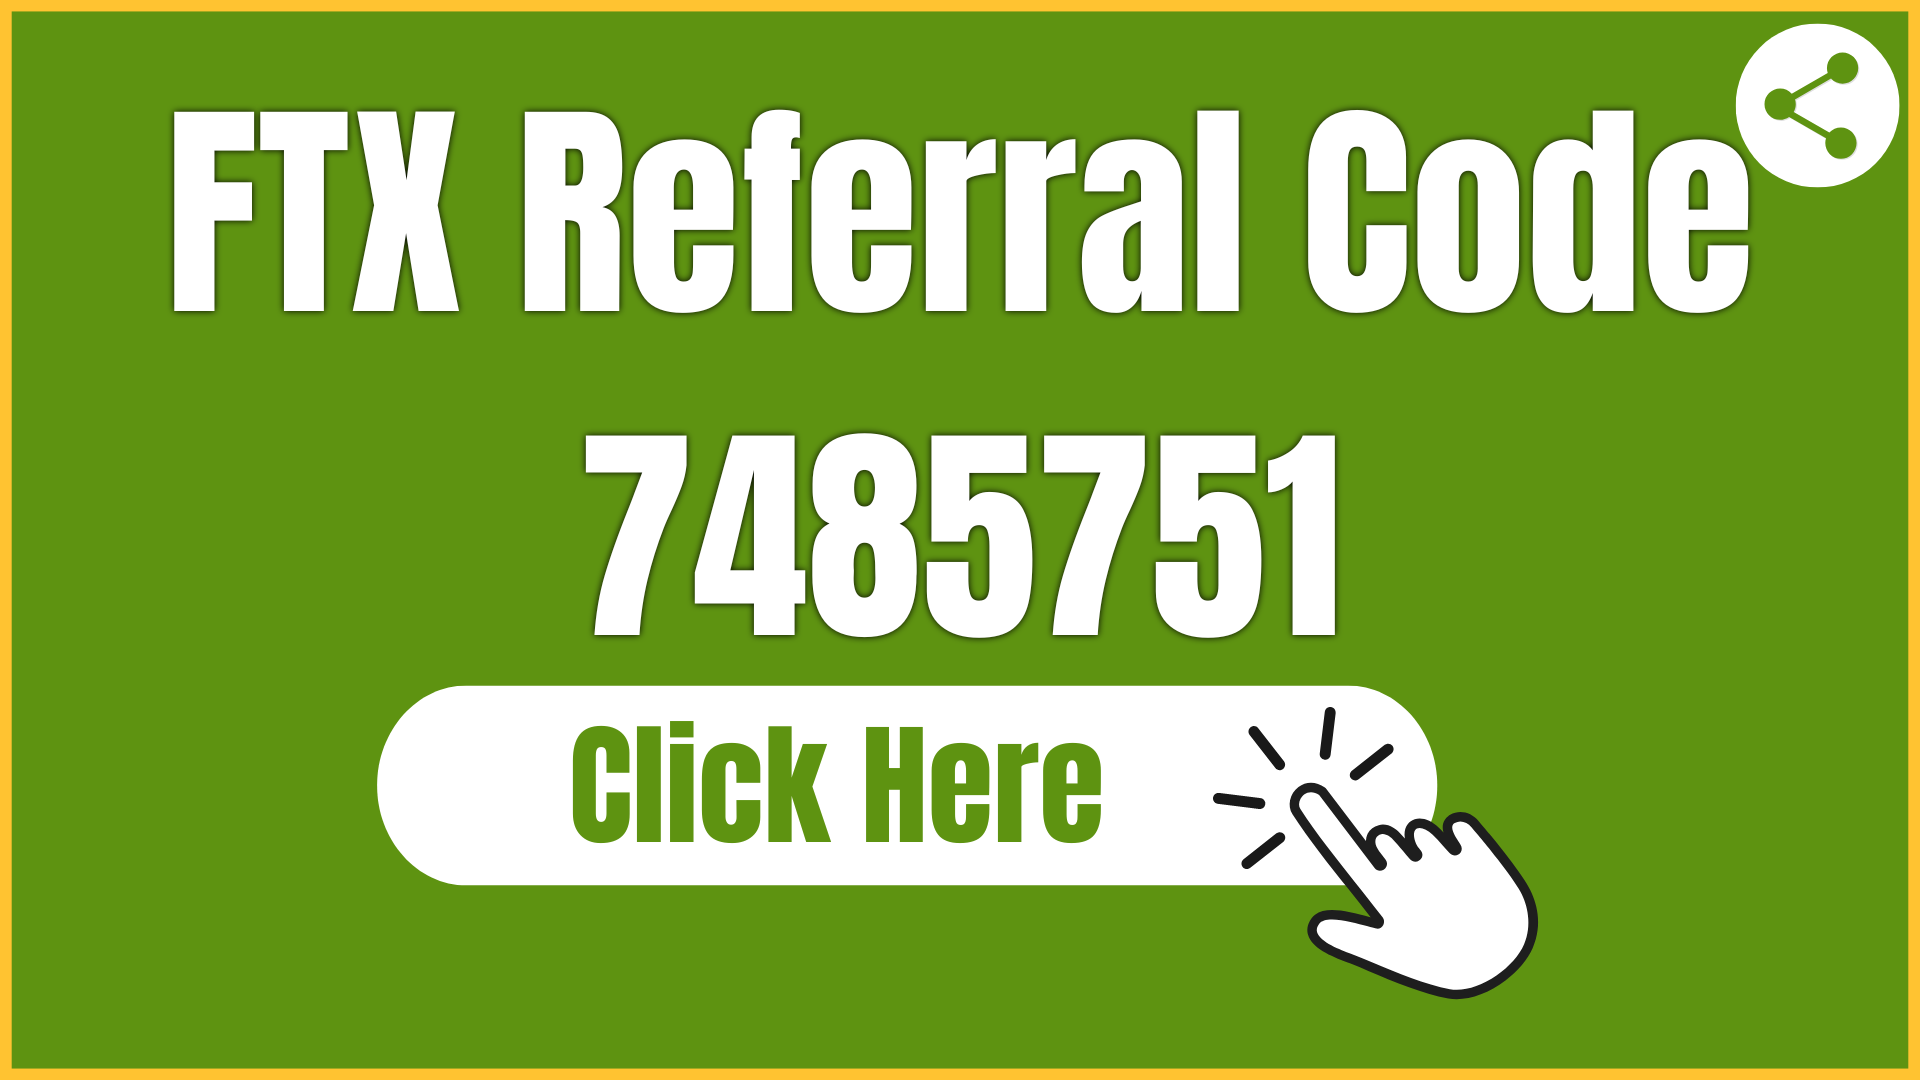 FTX-Referral-Code.png